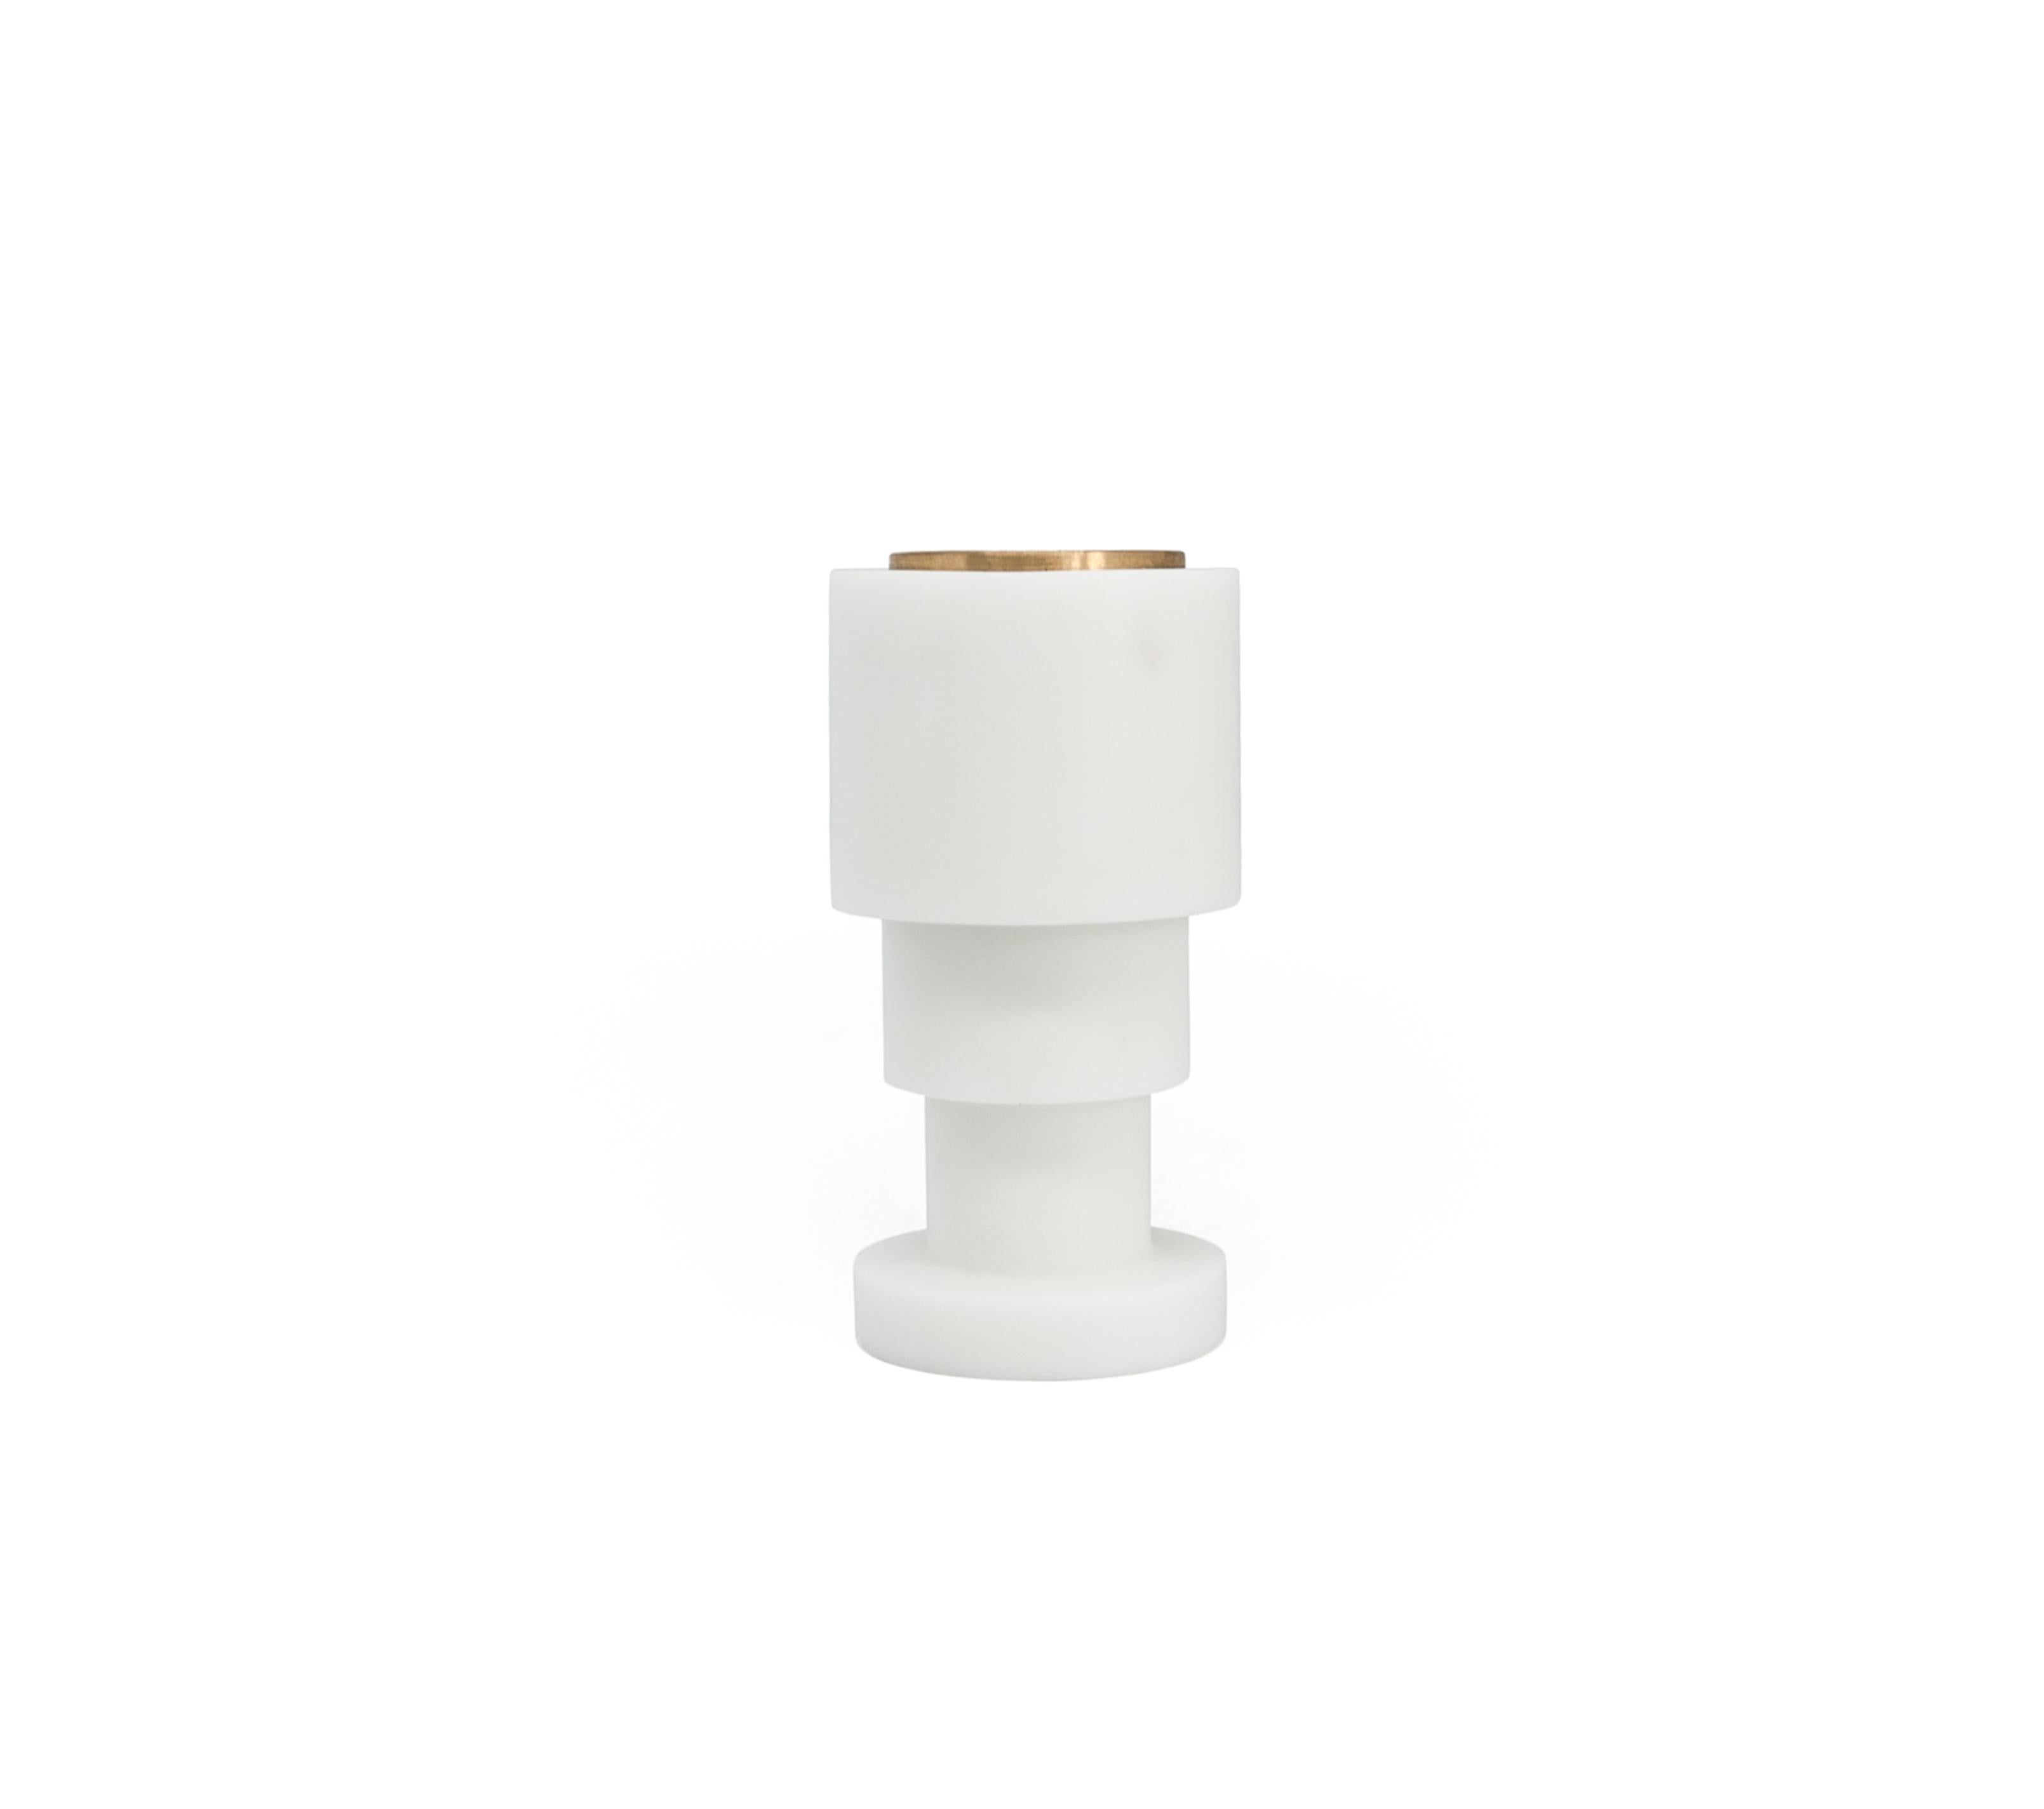 Short squared unicolor candleholder in white Carrara marble and brass.
-Jacopo Simonetti Design for FiammettaV-
Each piece is in a way unique (every marble block is different in veins and shades) and handmade by Italian artisans specialized over